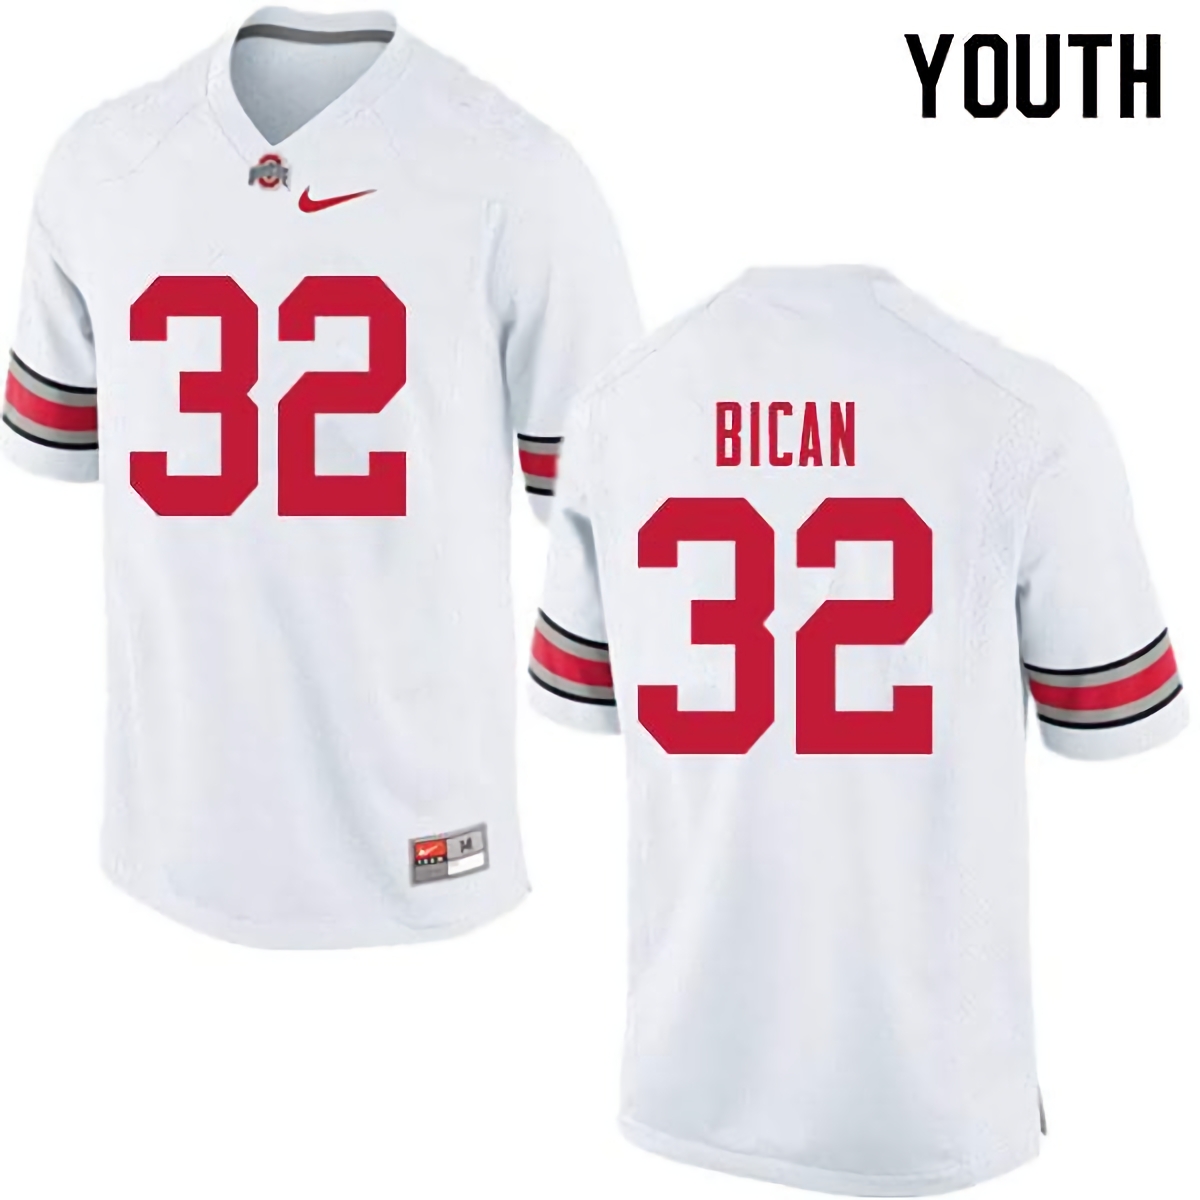 Luciano Bican Ohio State Buckeyes Youth NCAA #32 Nike White College Stitched Football Jersey CAJ4556GN